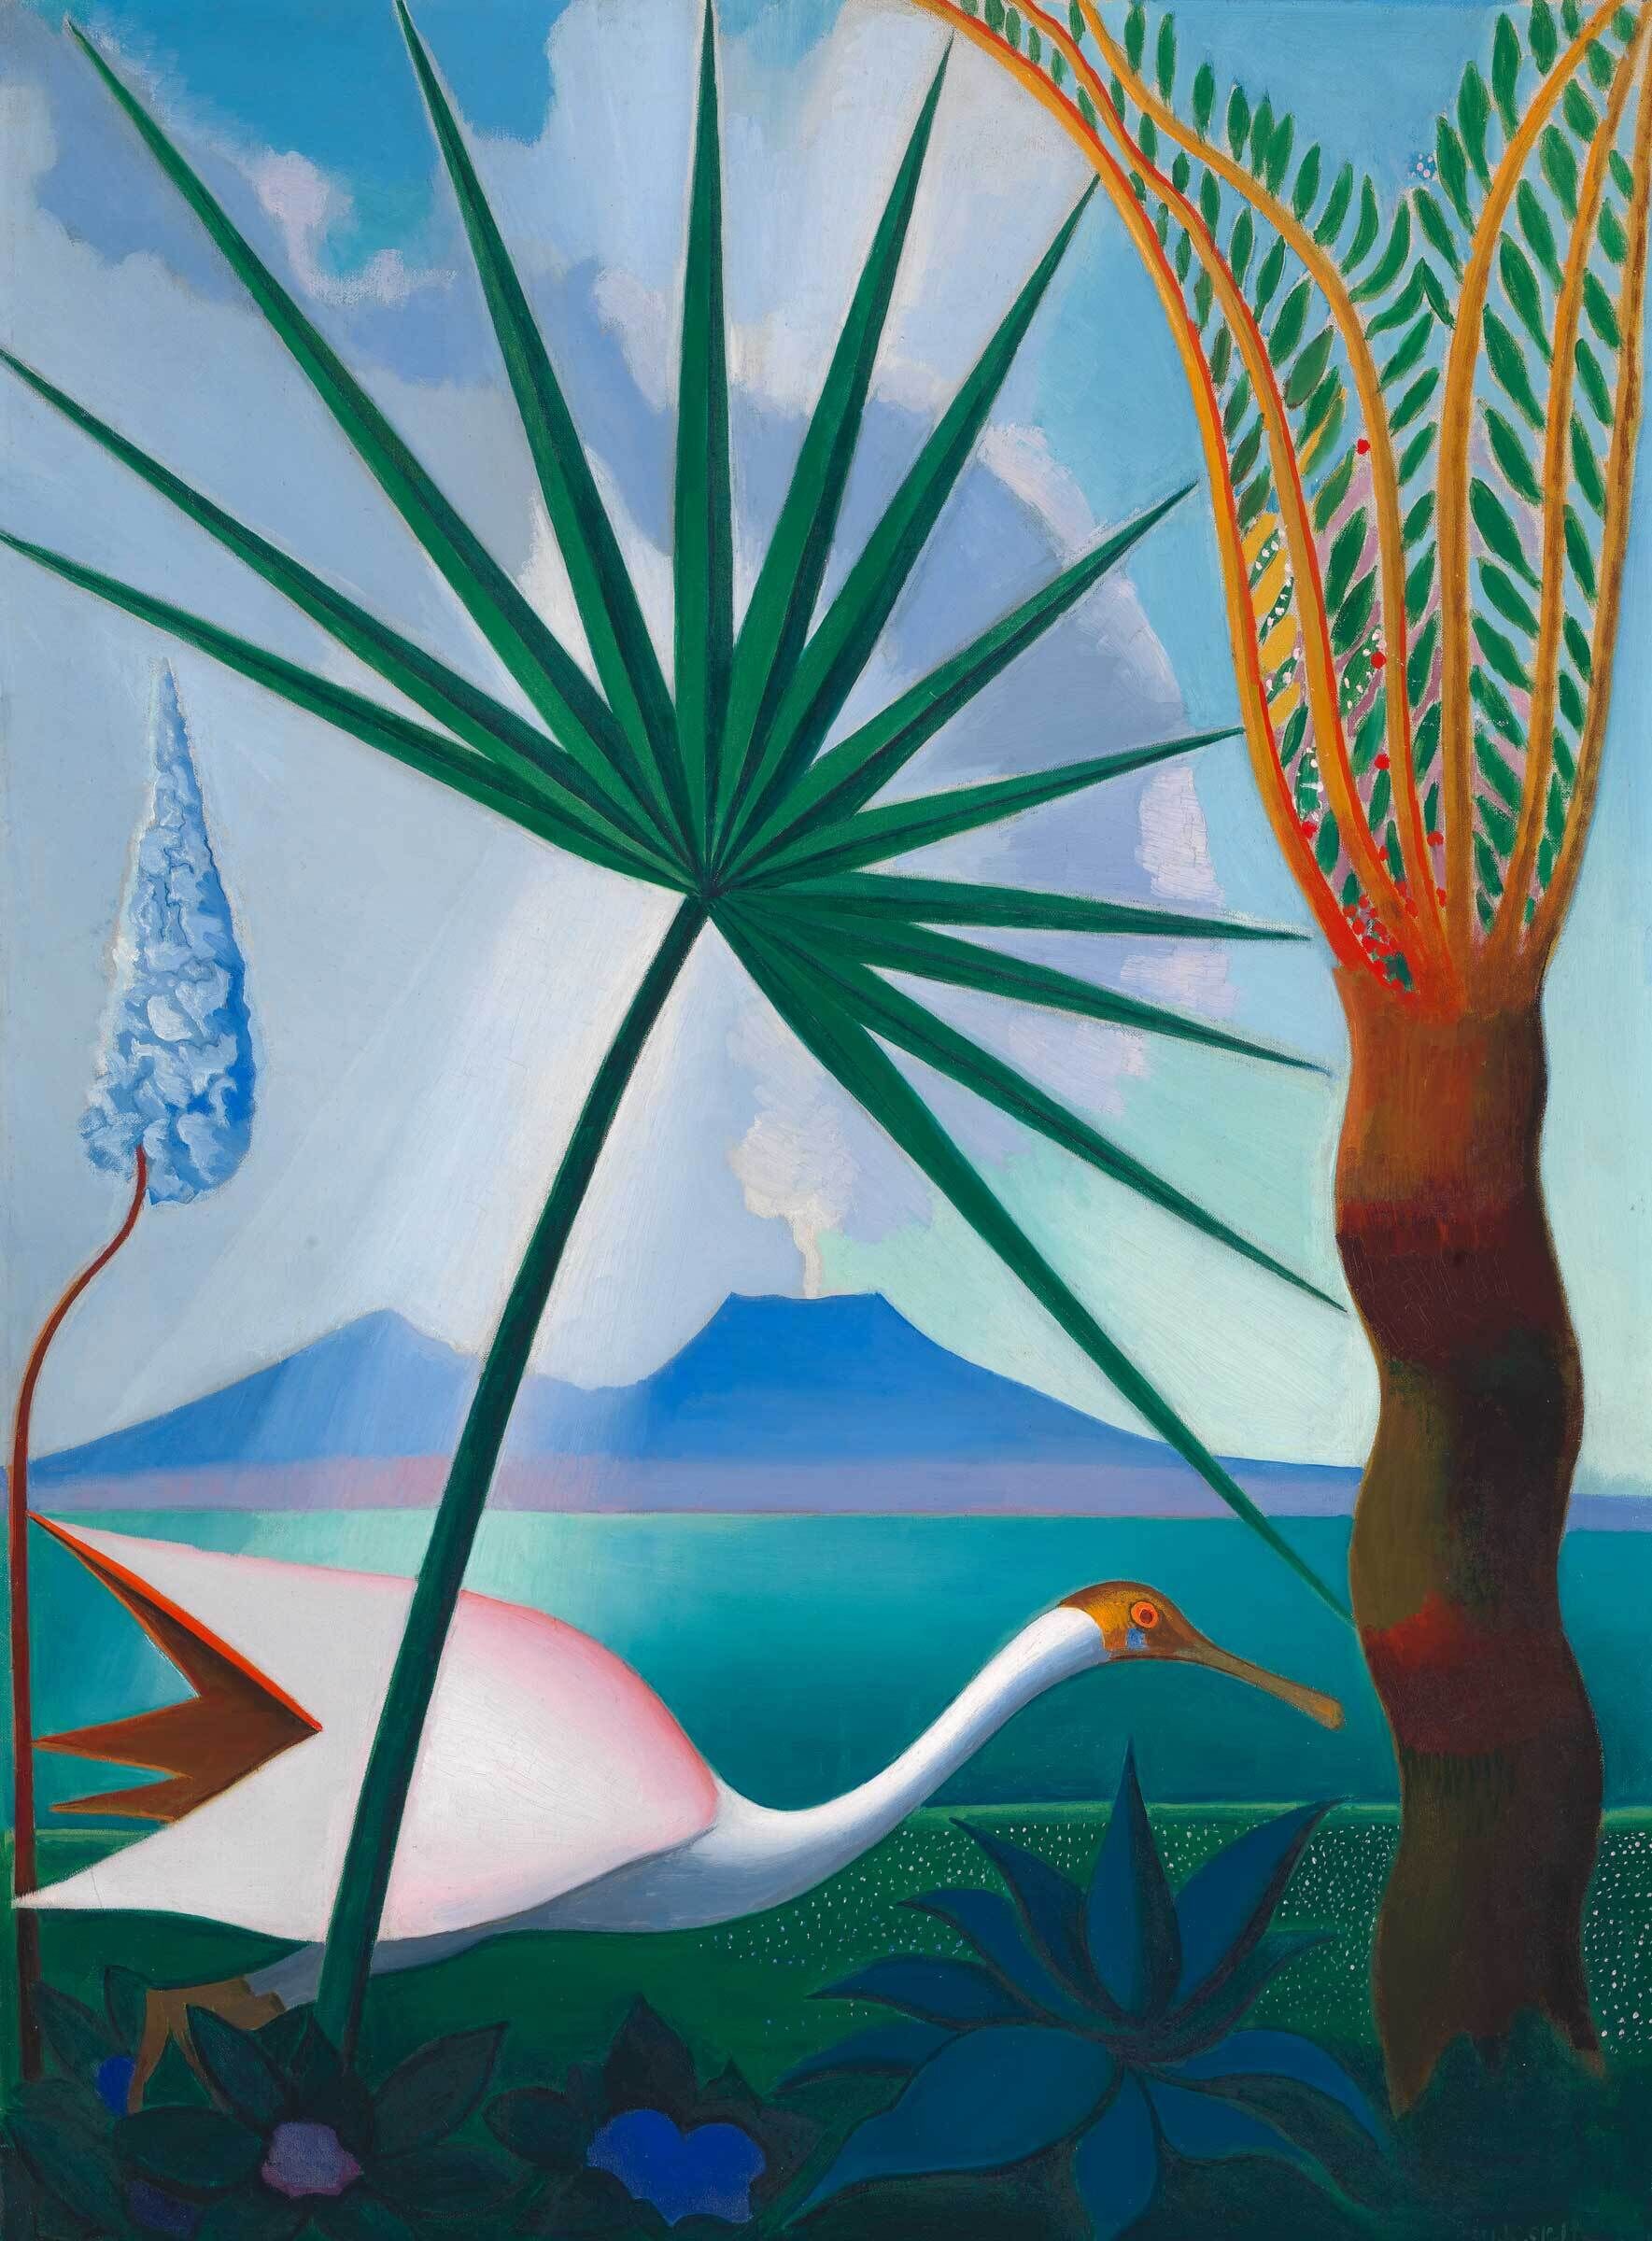 A stylized painting of a white bird with a long neck among tropical plants, with a blue mountain and sky in the background.